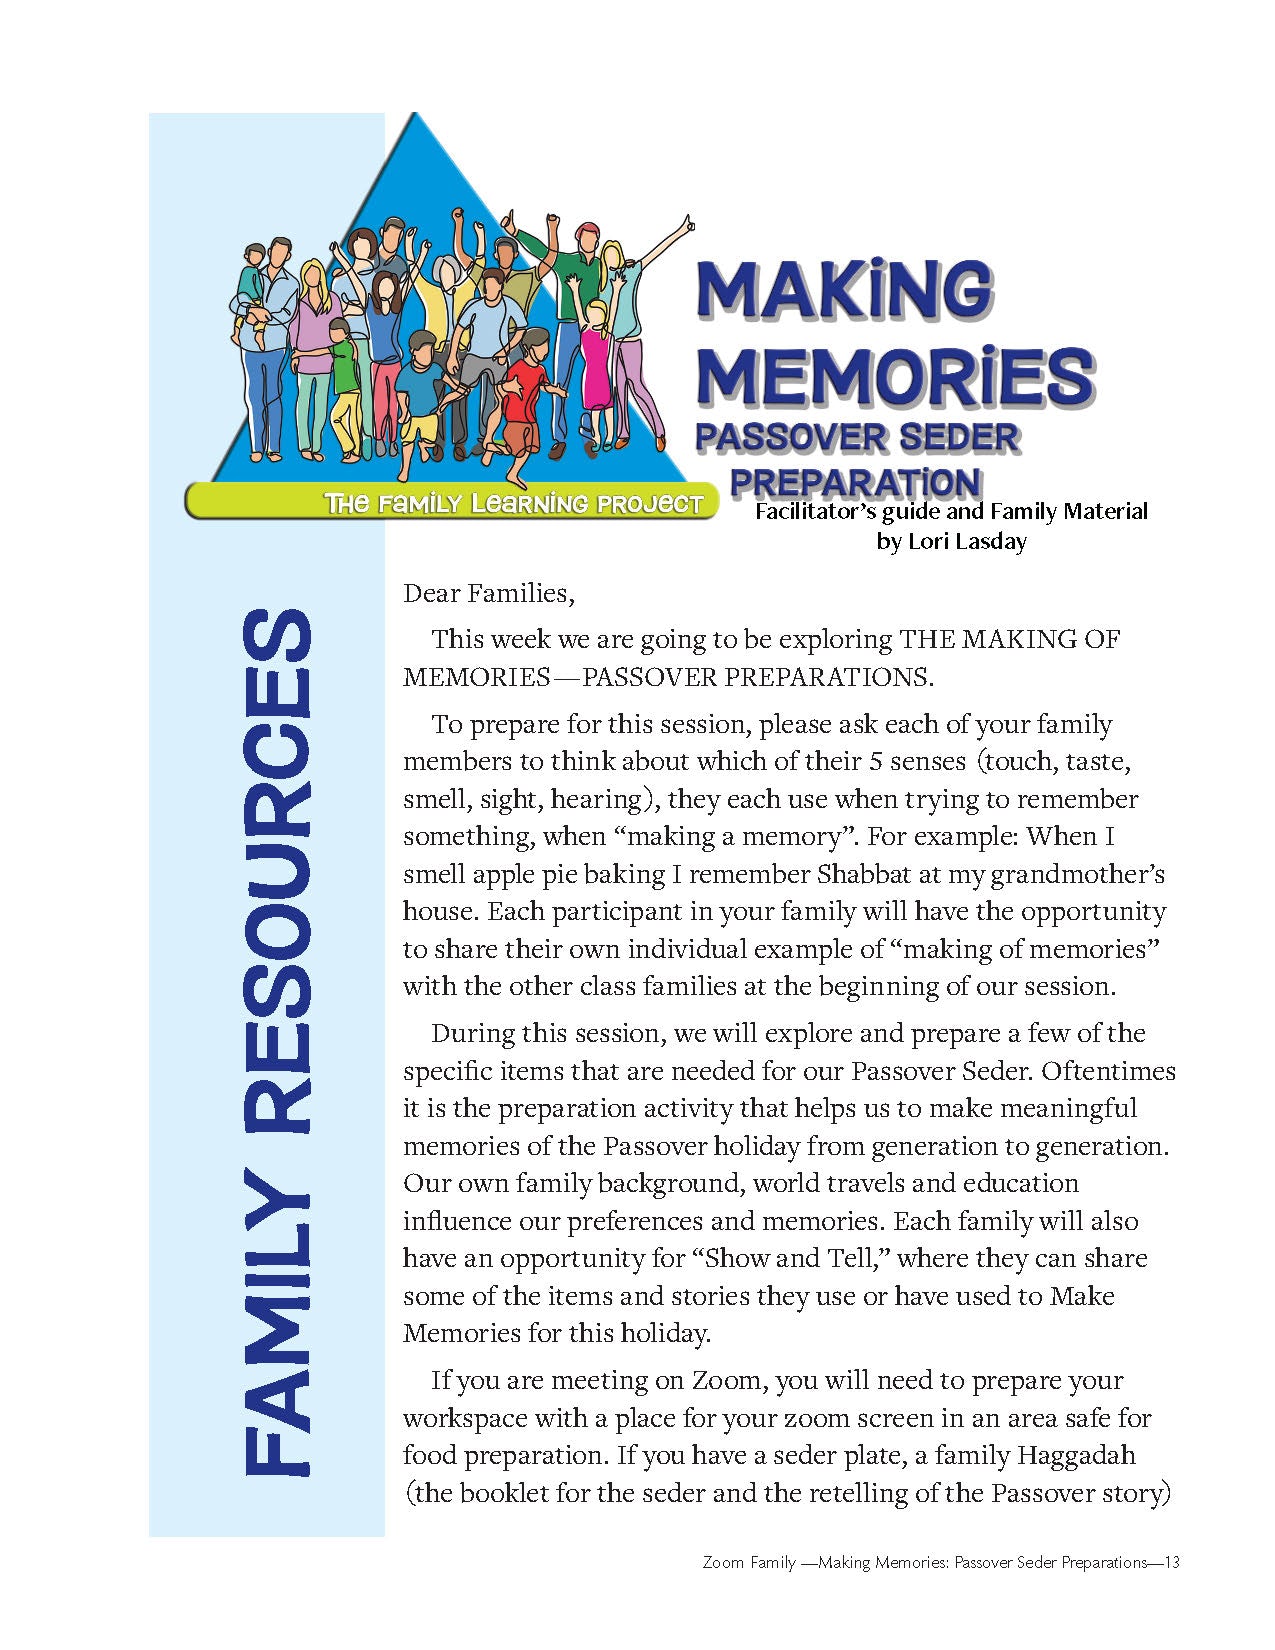 Family Learning Project: Making Memories: Passover Seder Preparations